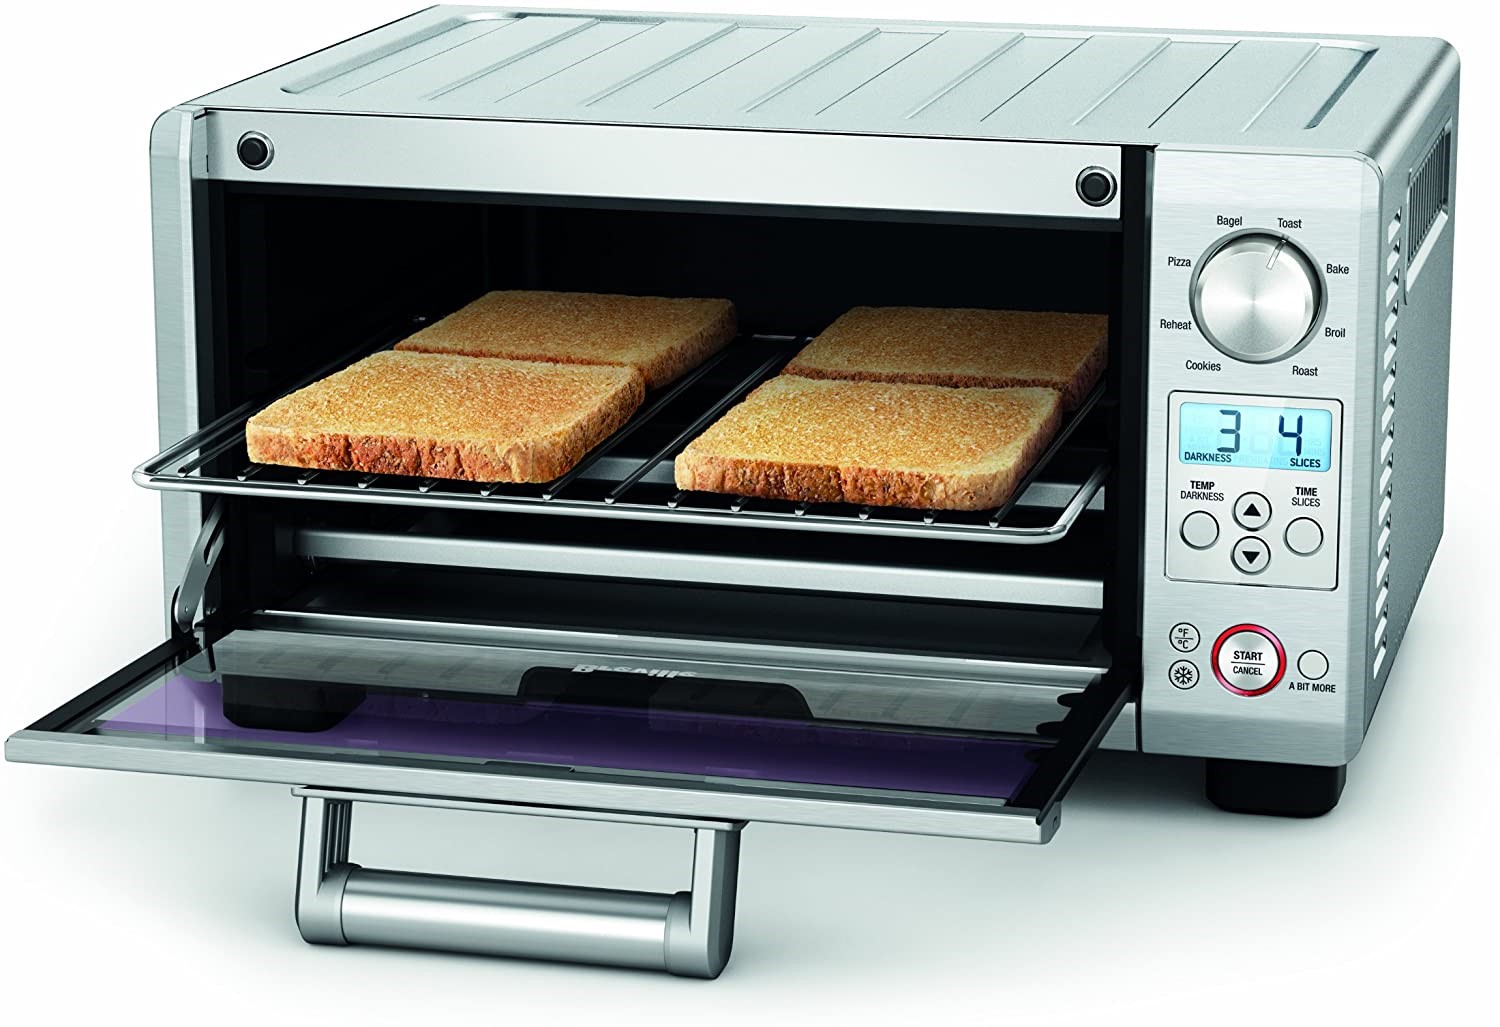 Best Toaster Oven of 2020